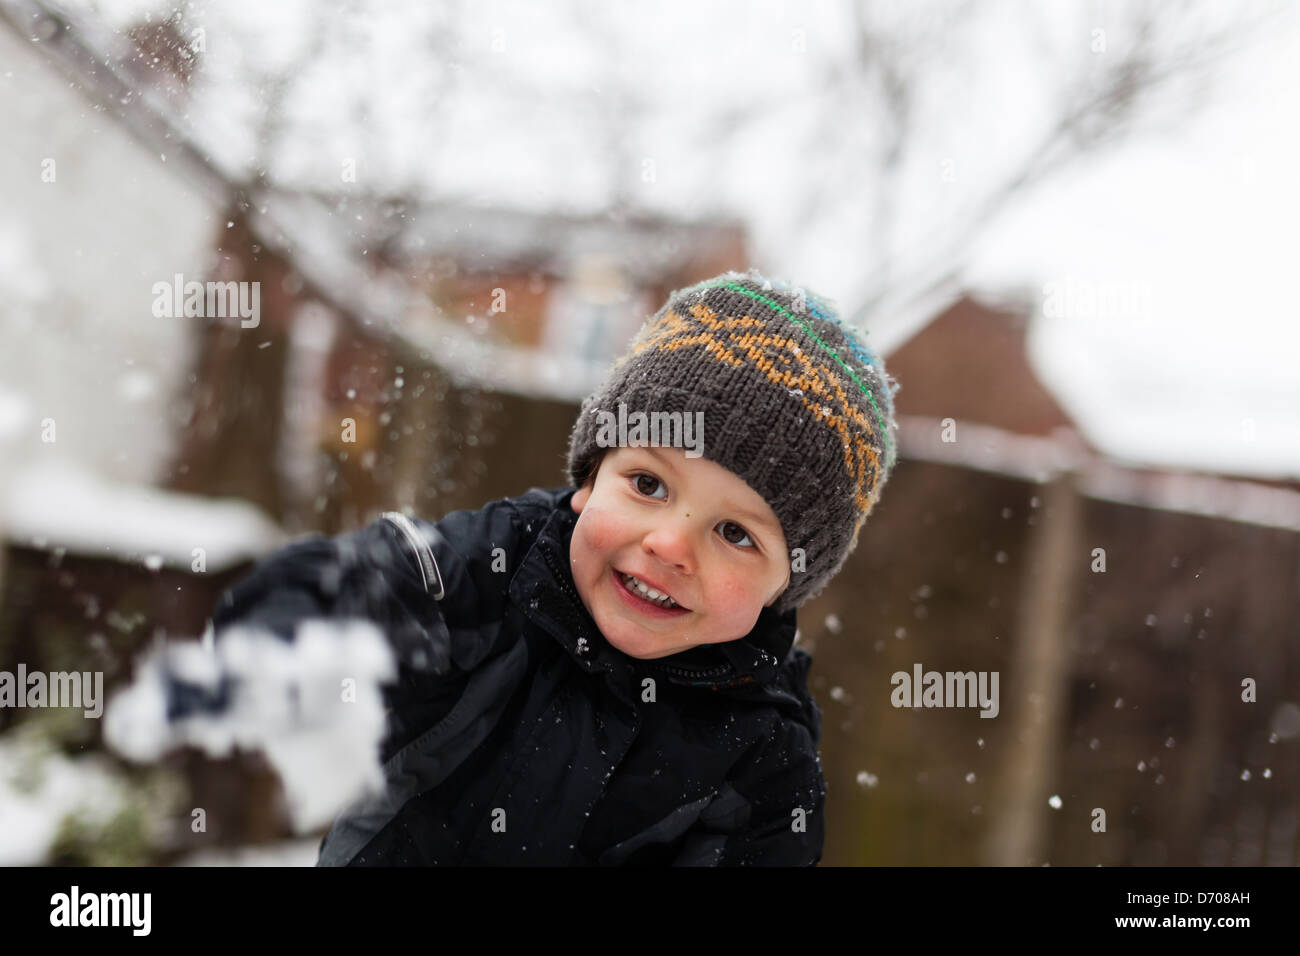 young boy throwing a snowball Stock Photo